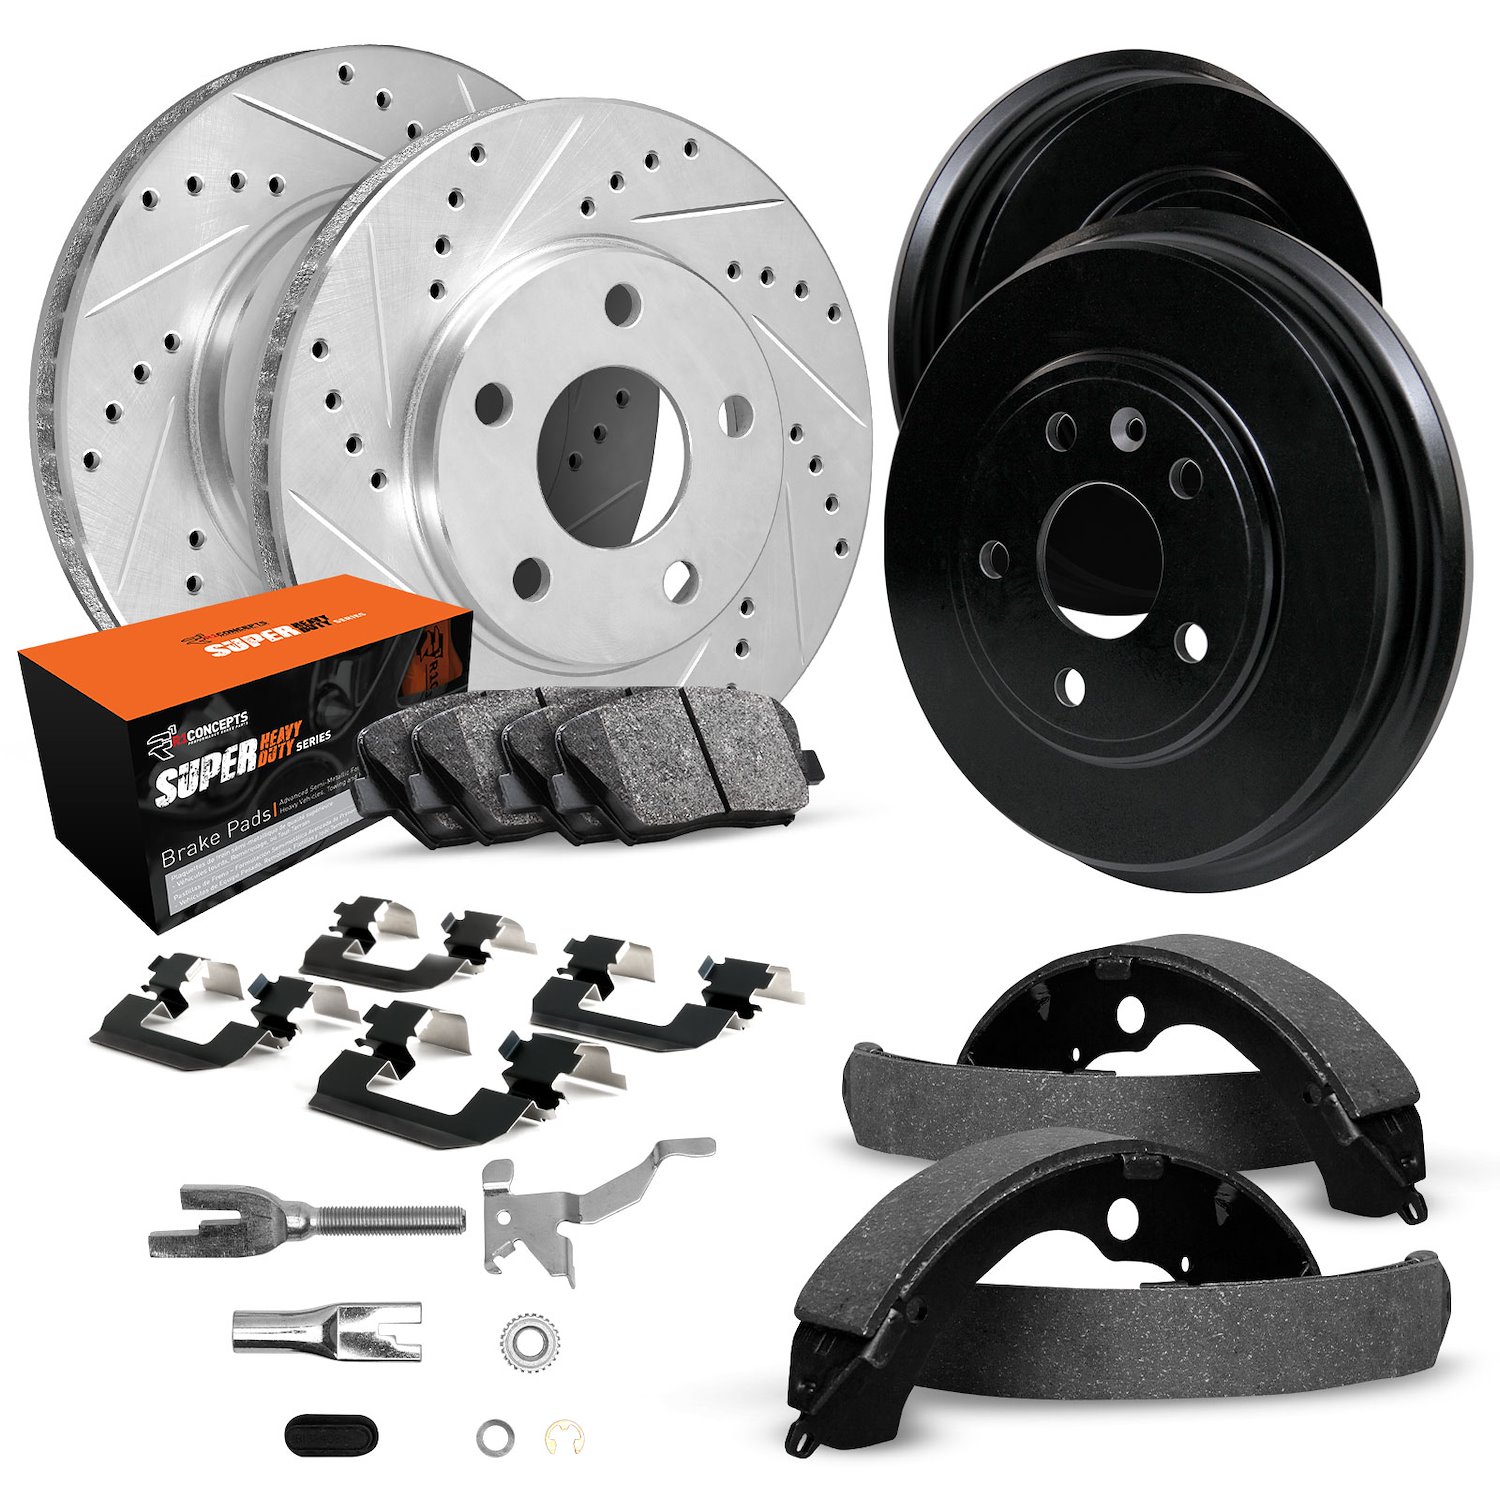 E-Line Drilled/Slotted Silver Rotor & Drum Set w/Super-Duty Pads, Shoes/Hardware/Adjusters, 1980-1985 Ford/Lincoln/Mercury/Mazda